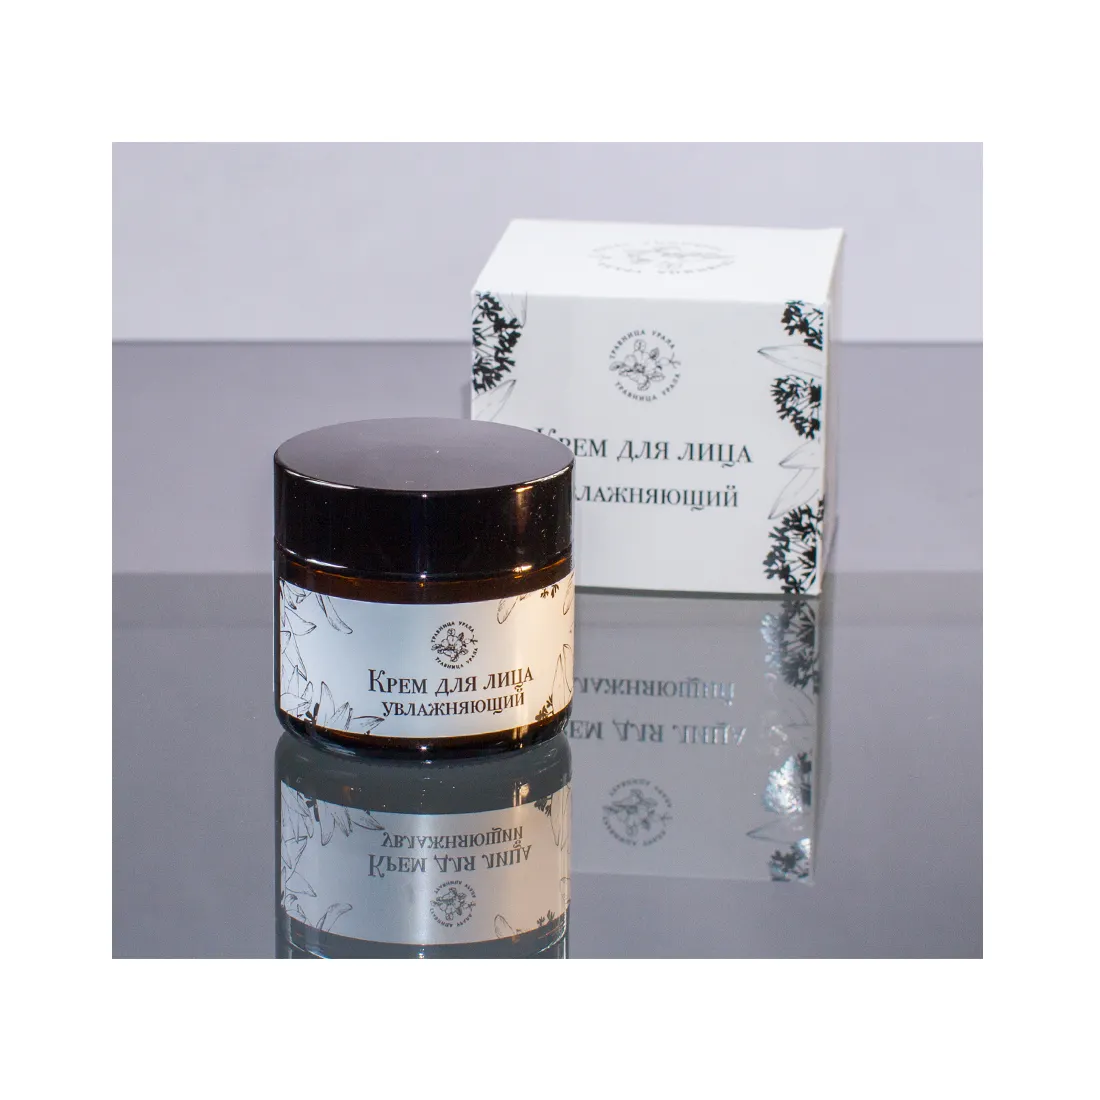 Moisturizing face skin care organic cosmetics natural herbal extracts moisturizing anti wrinkle facial cream for any skin type